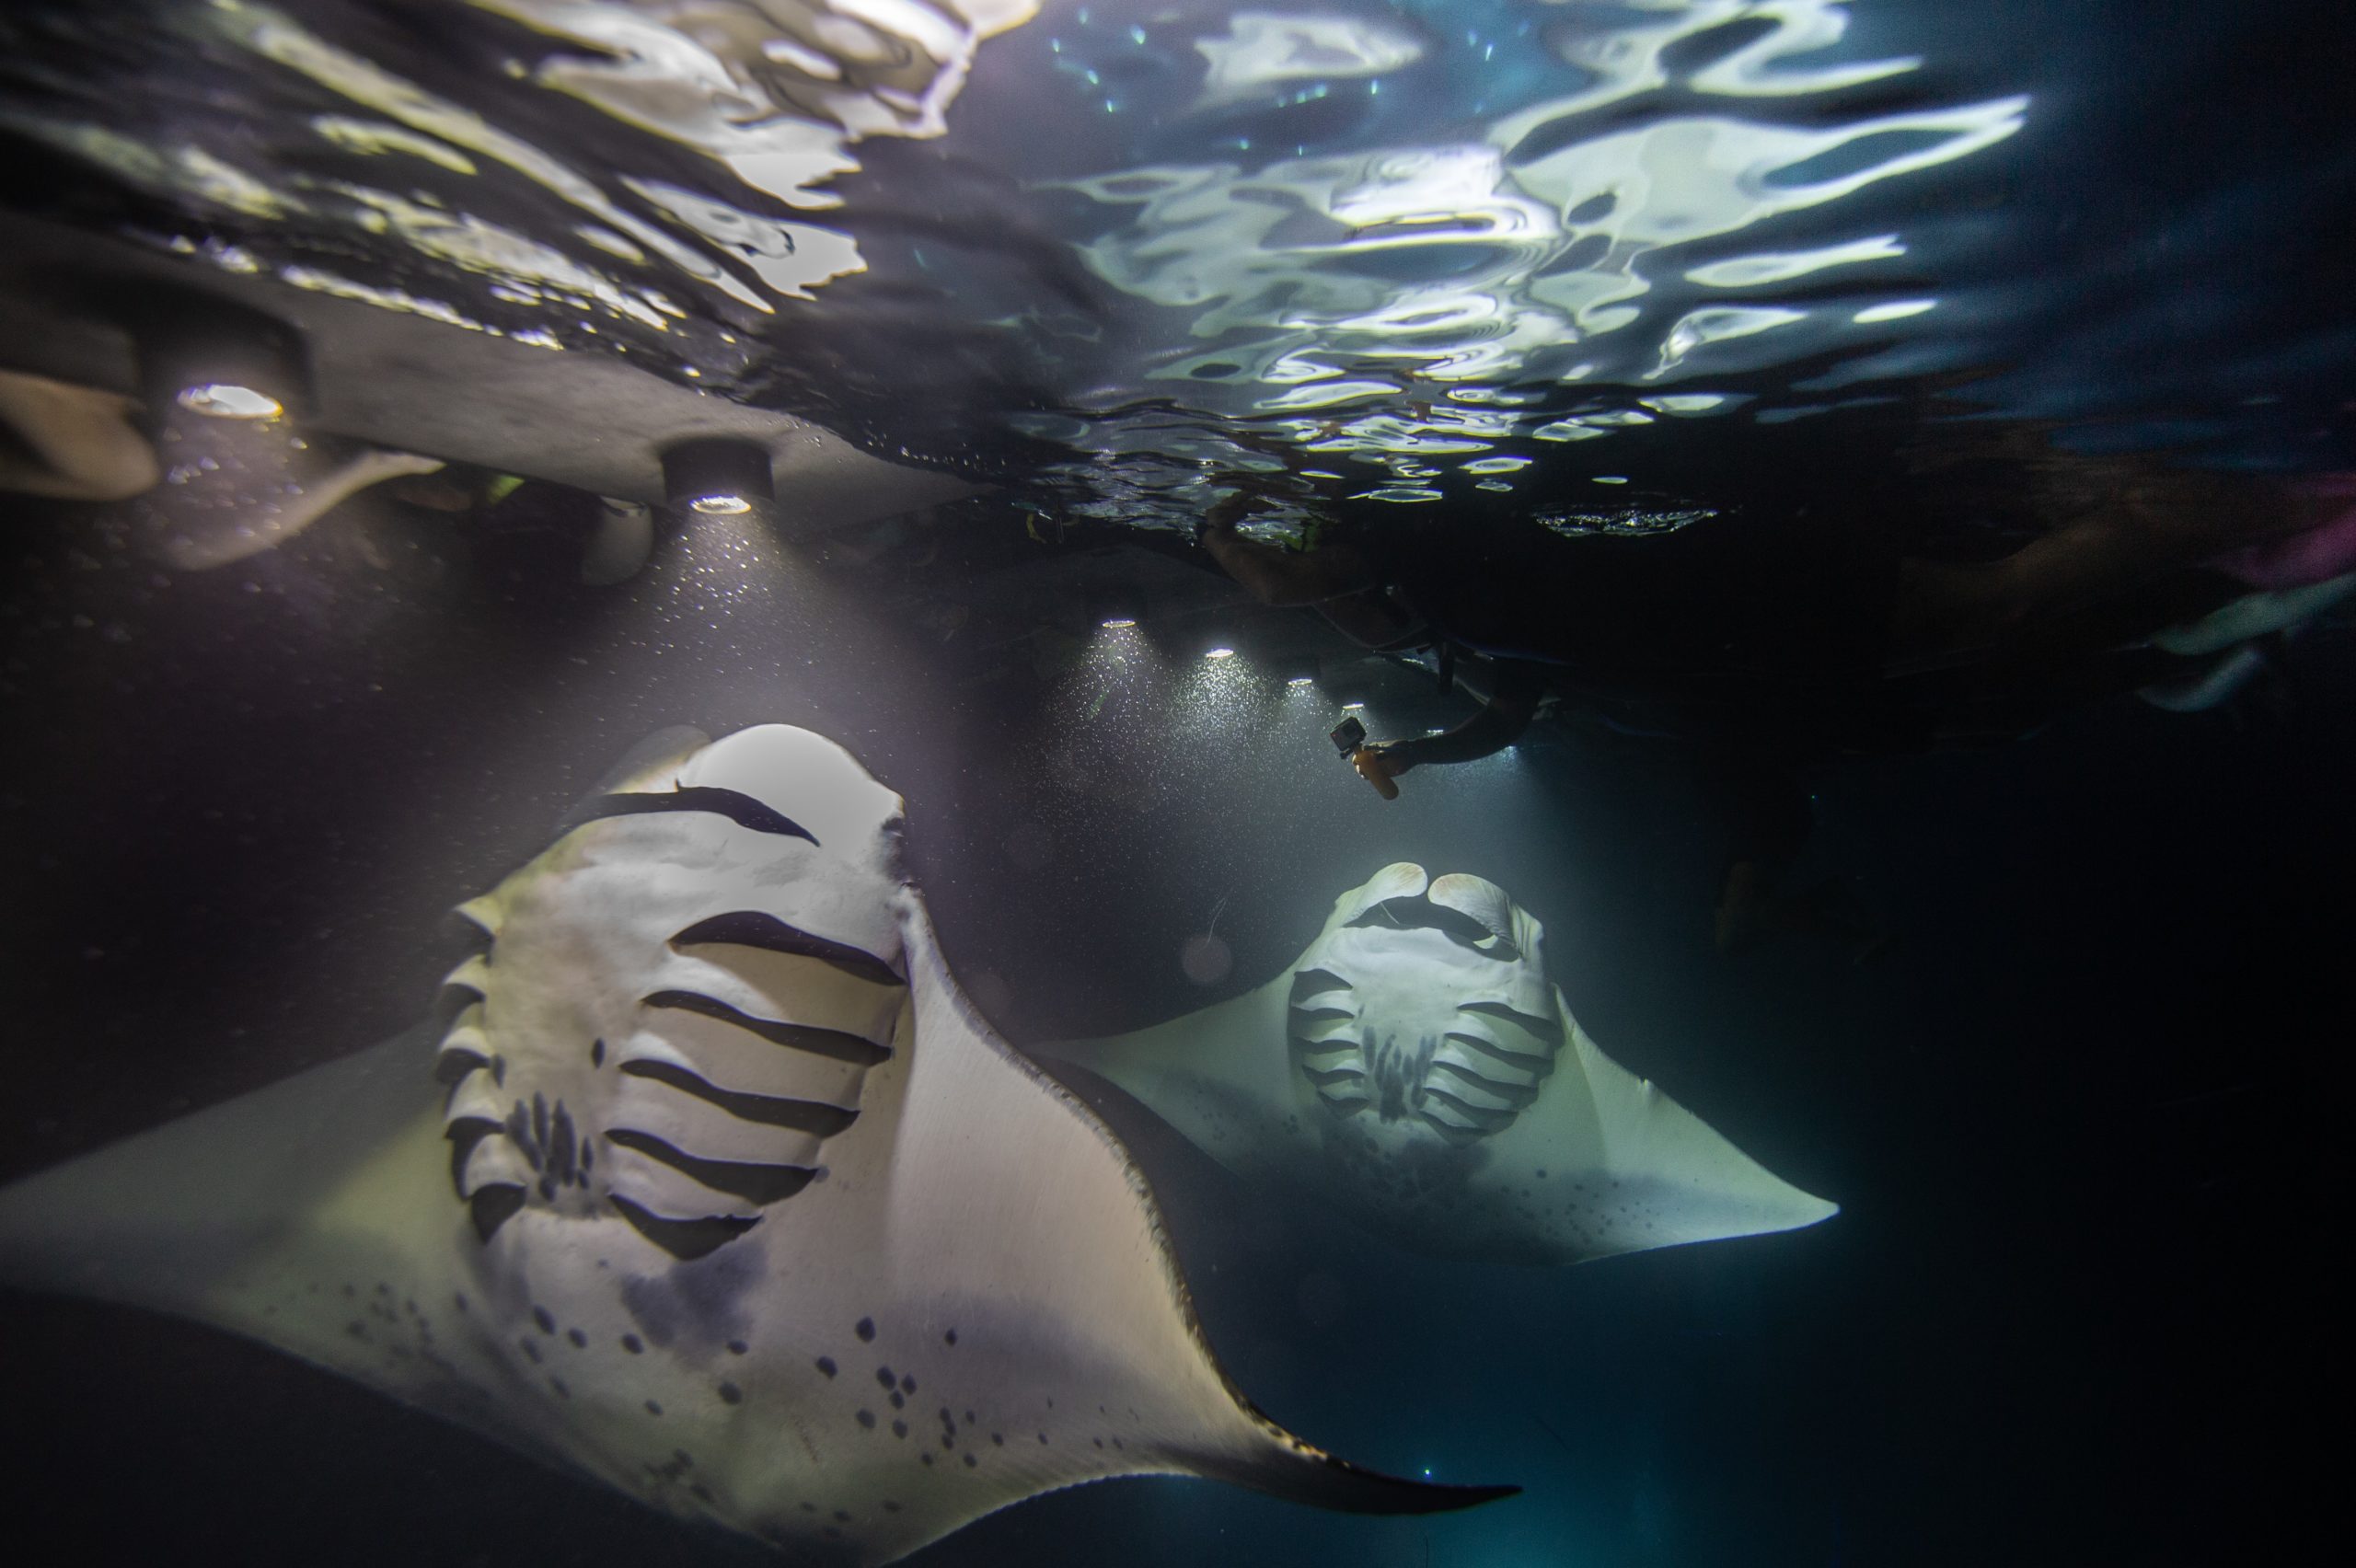 Manta rays form close friendships, shattering misconceptions